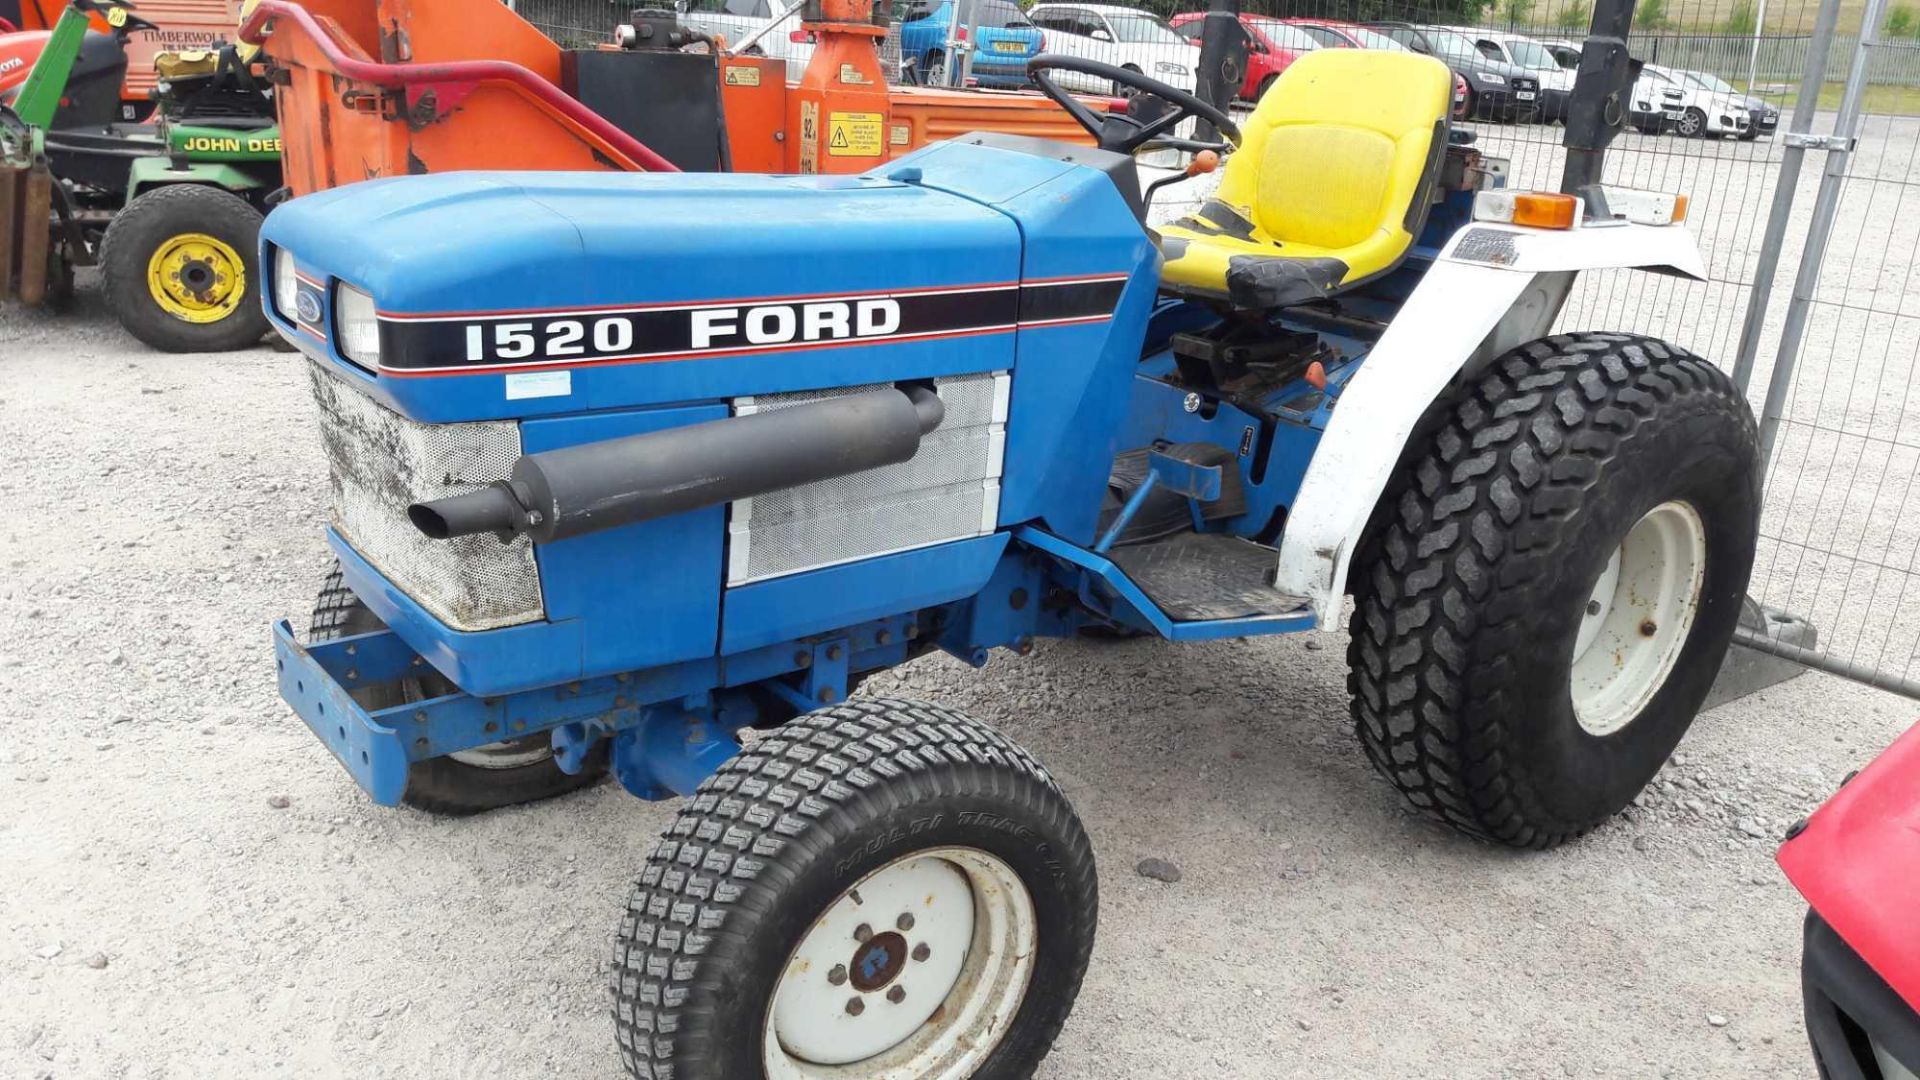 FORD COMPACT TRACTOR 1520 3778 HOURS